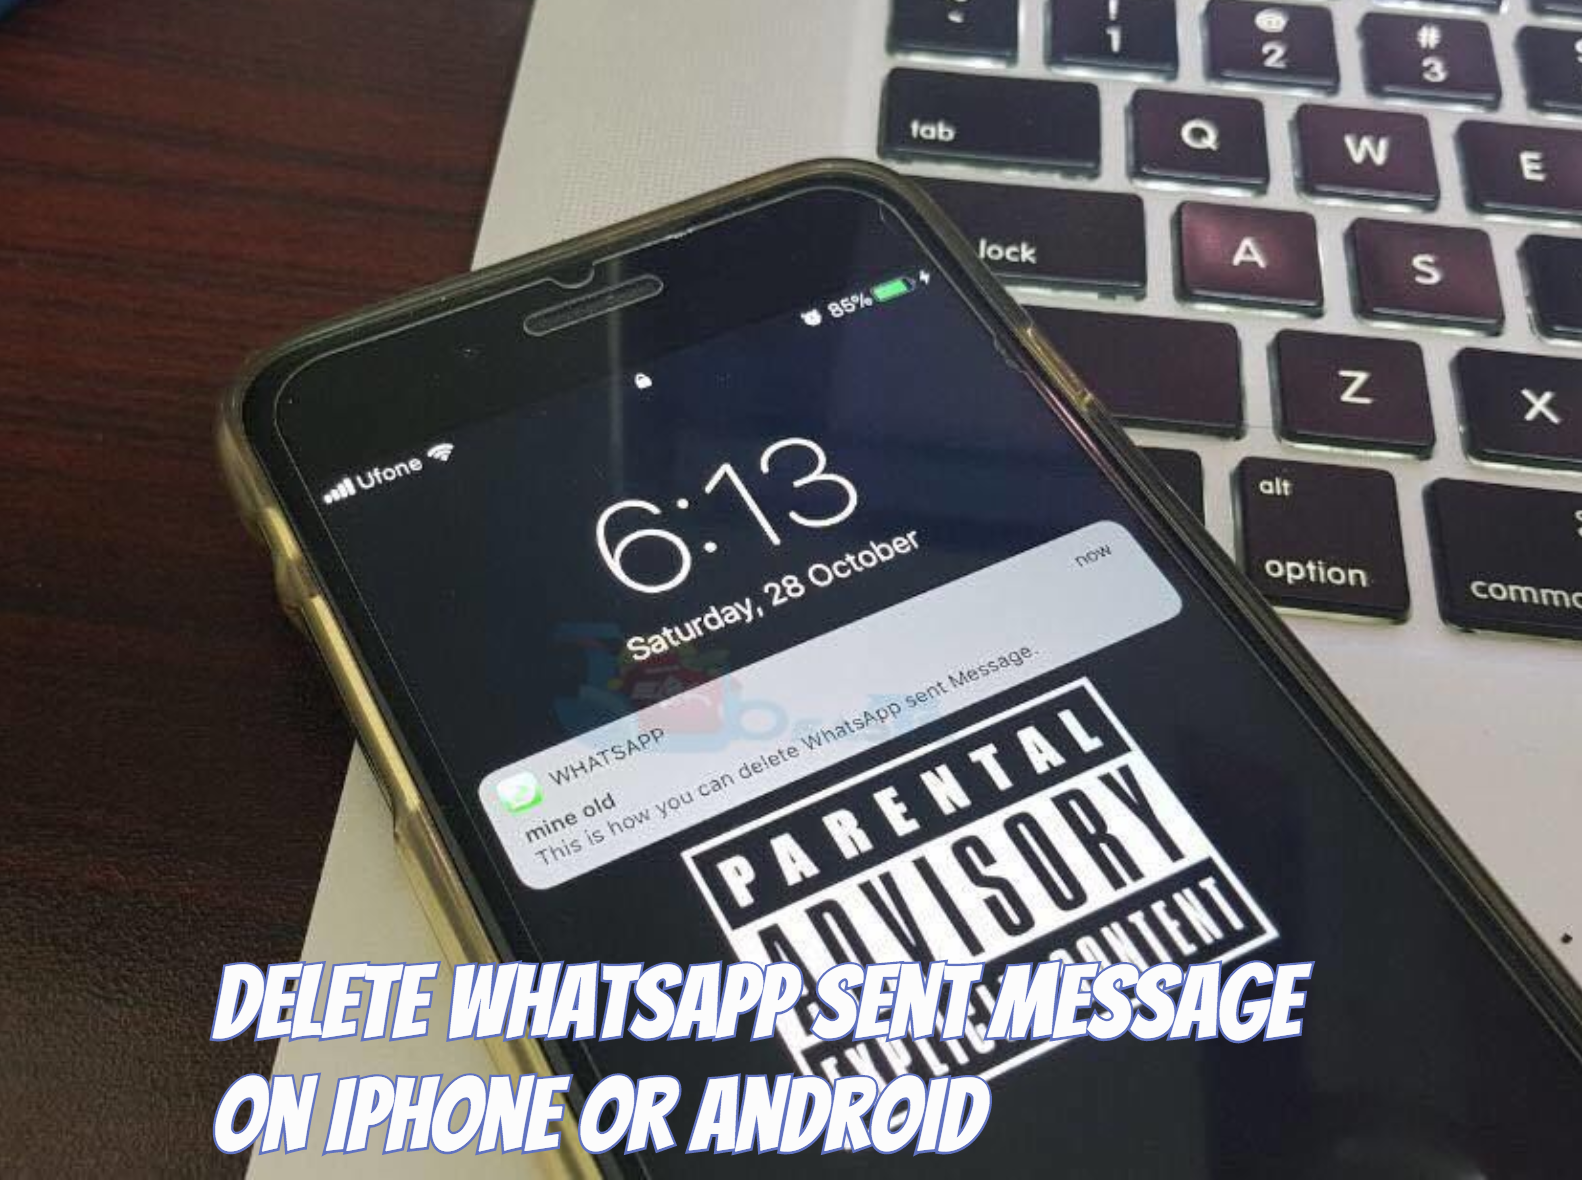 Delete WhatsApp Sent Message On iPhone Or Android